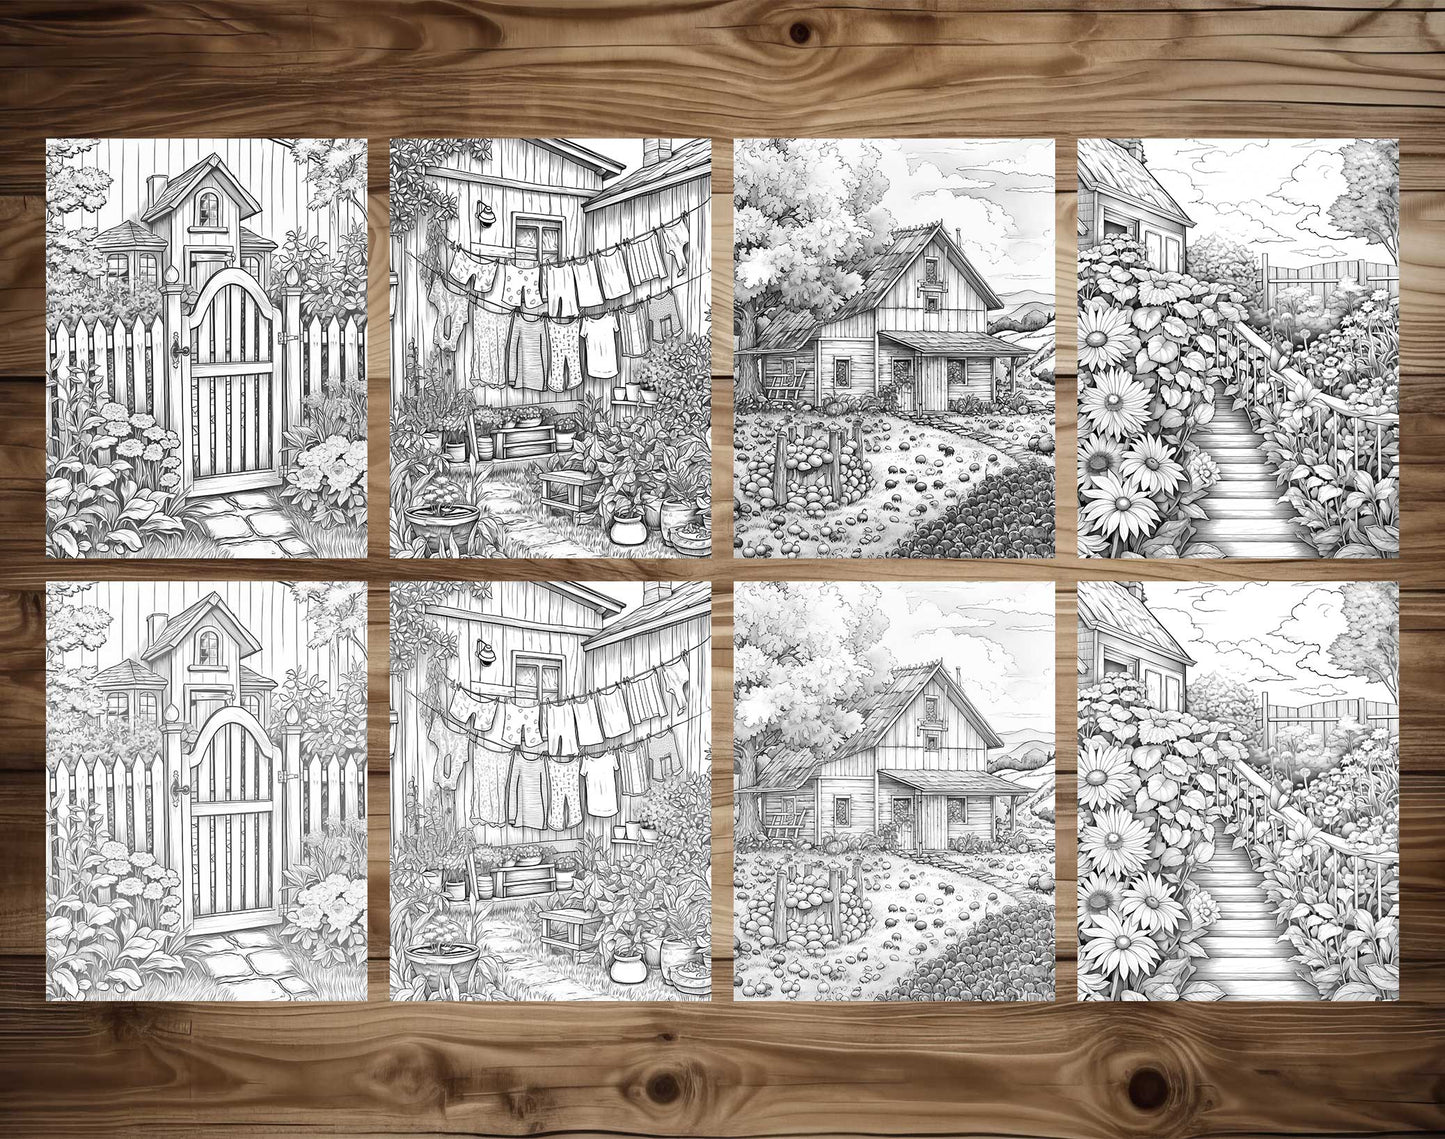 25 Country Dreams Grayscale Coloring Pages - Instant Download - Printable Dark/Light